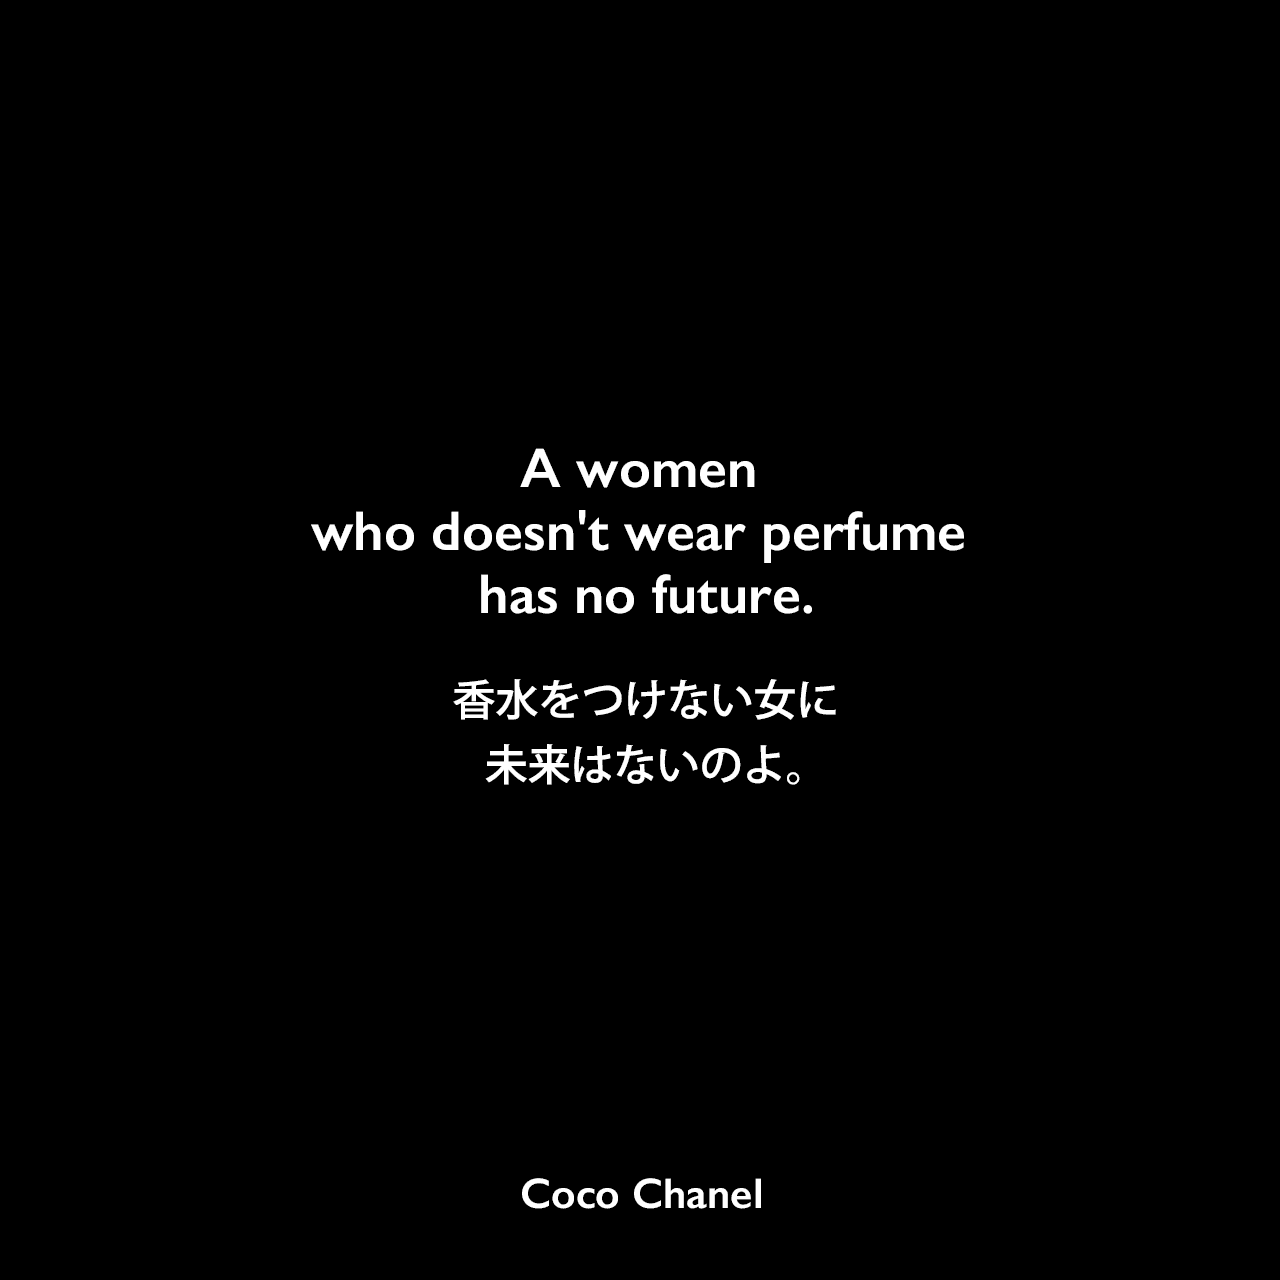 A women who doesn't wear perfume has no future.香水をつけない女に未来はないのよ。Coco Chanel